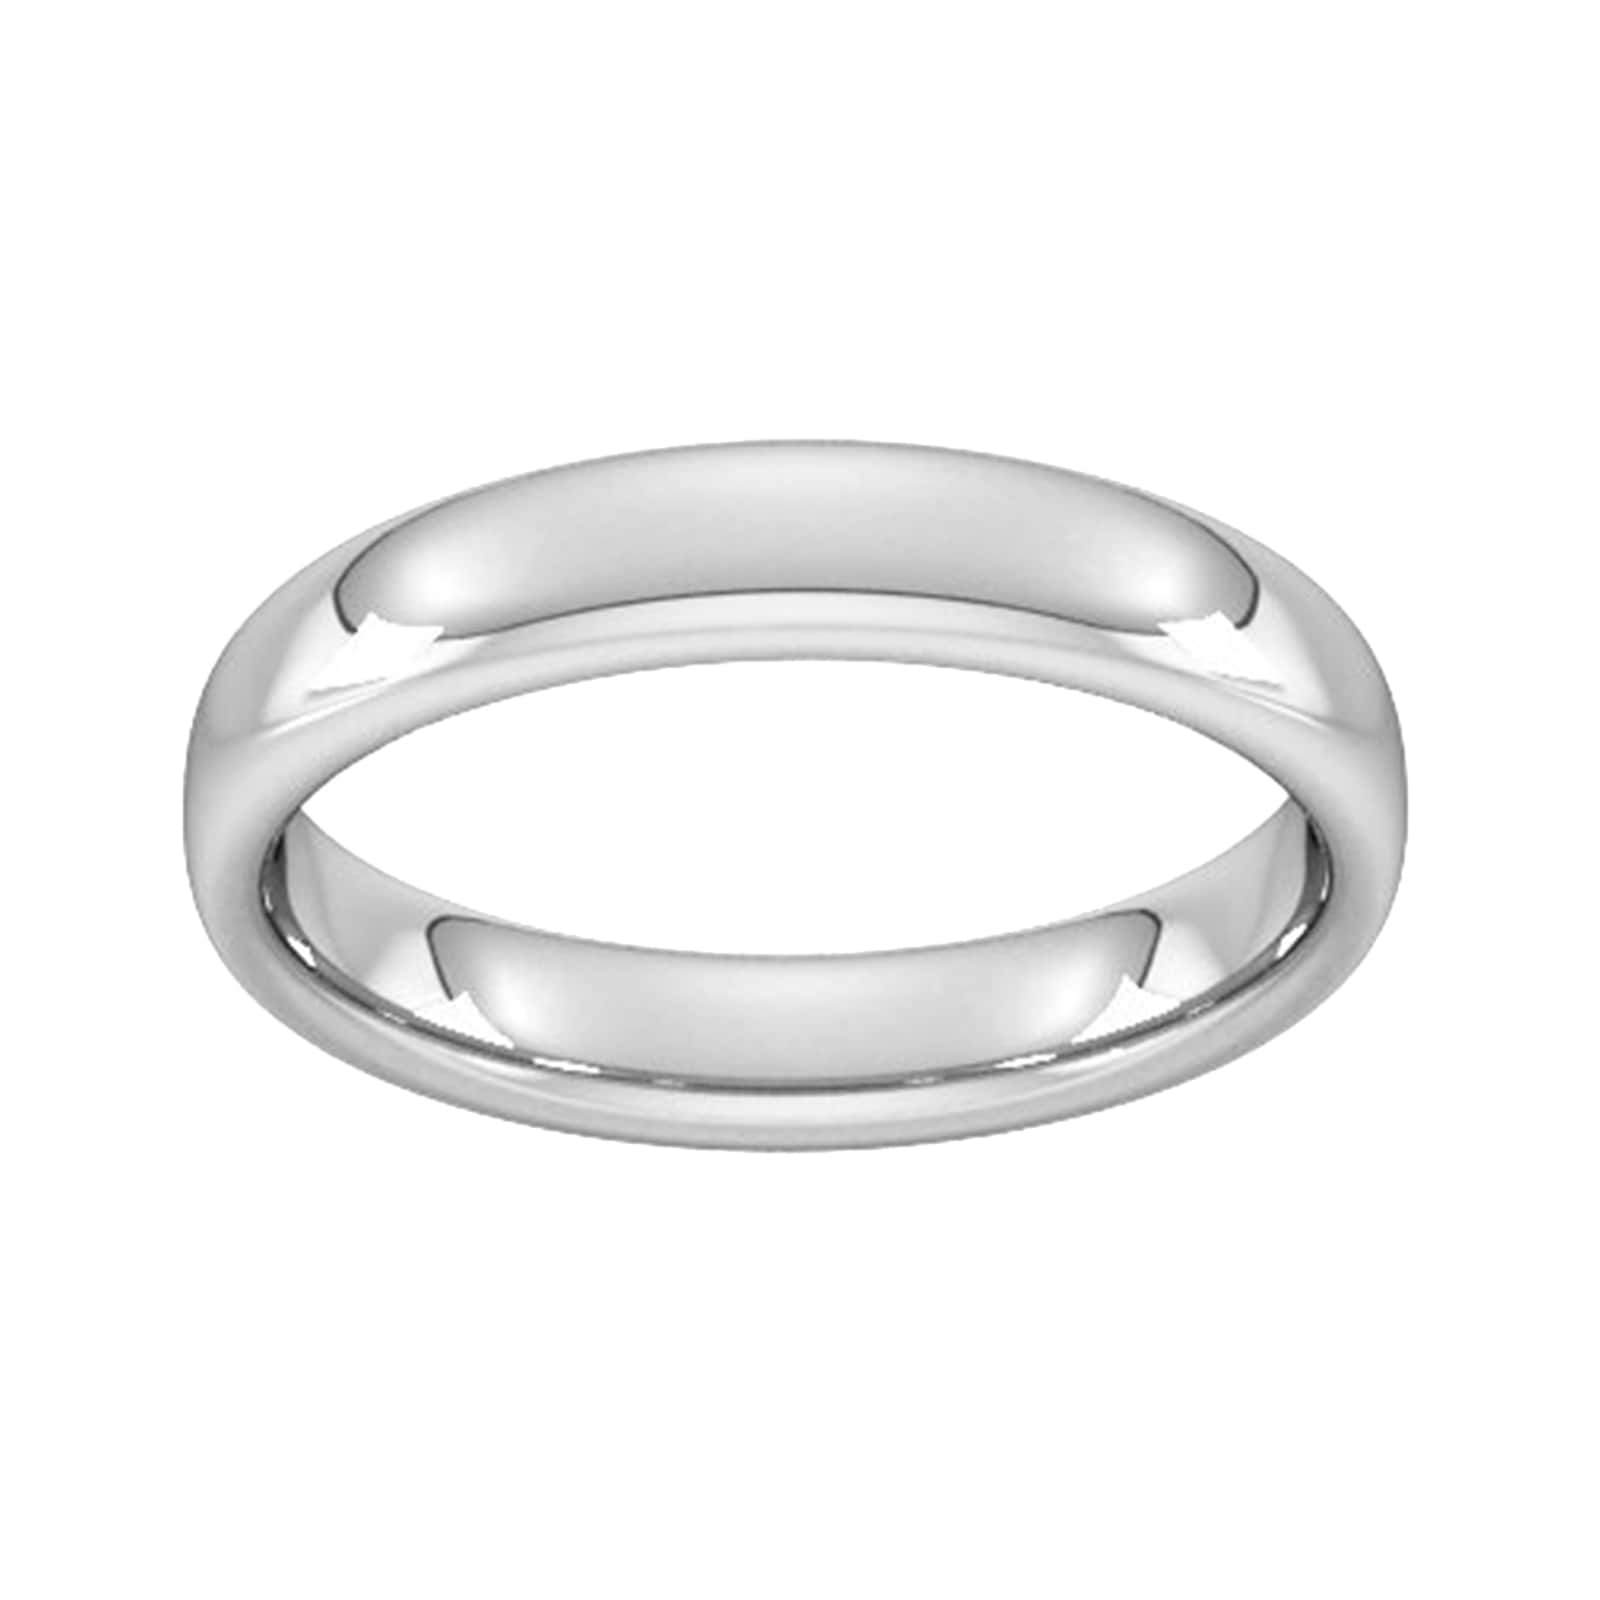 4mm Slight Court Heavy Wedding Ring In Sterling Silver - Ring Size S